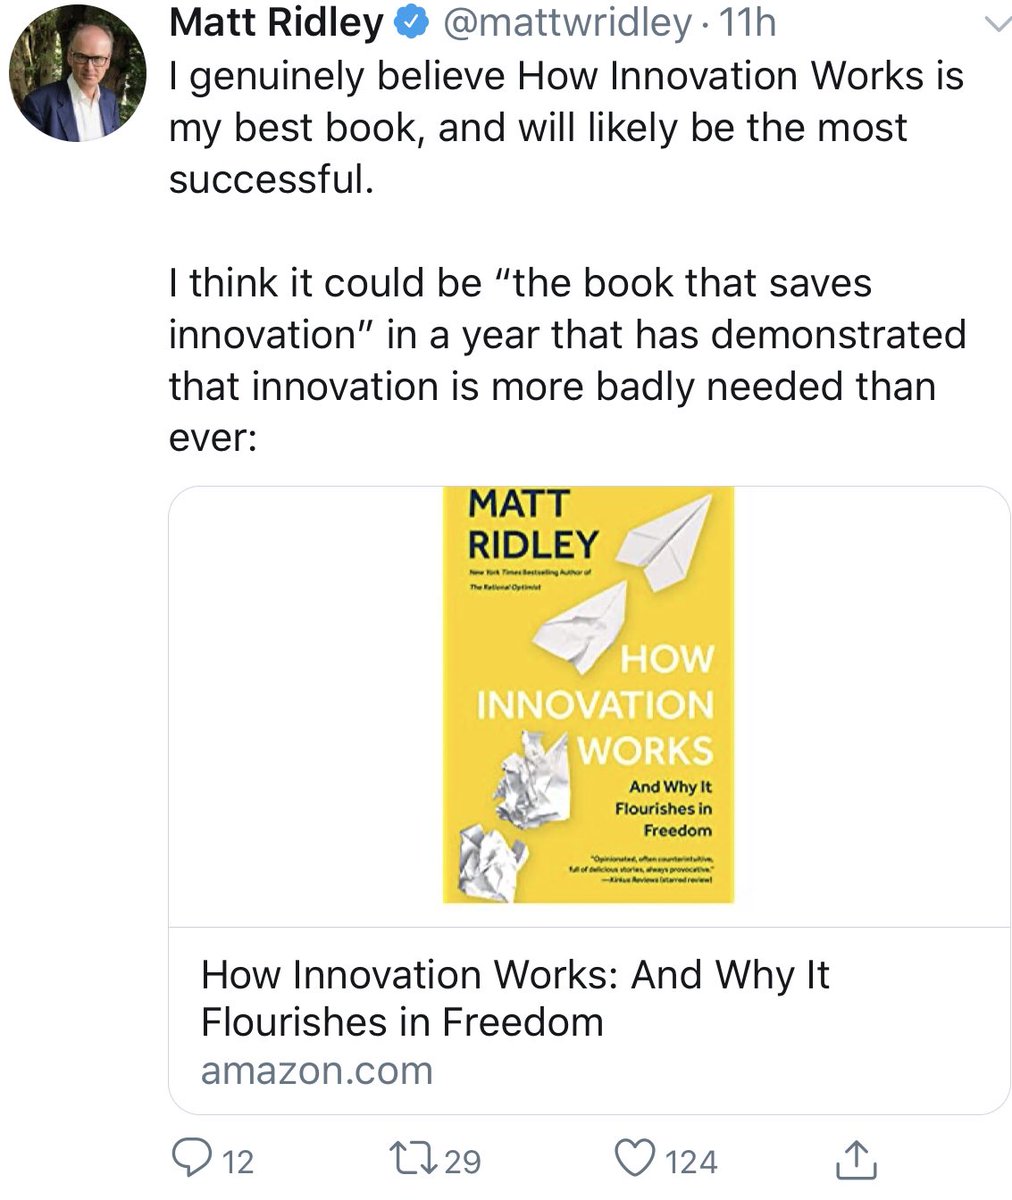 See also Matt Ridley on Innovation. Thinks he's the greatest writer ever on the subject. Presumably no Remain leaning writer could ever come close (being a sheep and all that).